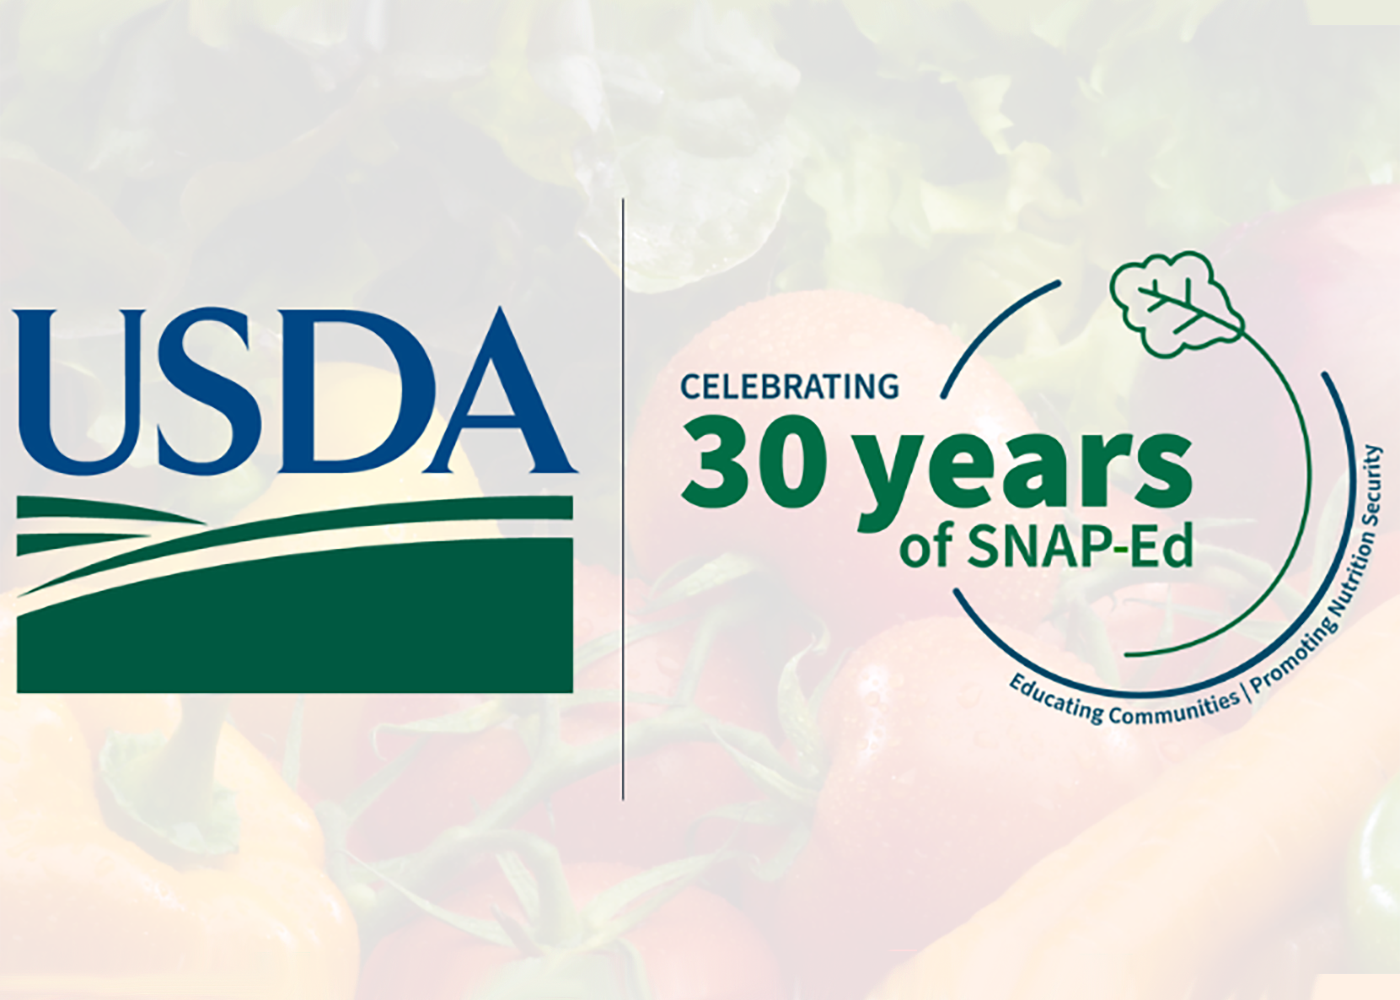 USDA Celebrating 30 years of SNAP-Ed Educating Communities, Promoting Nutrition Security